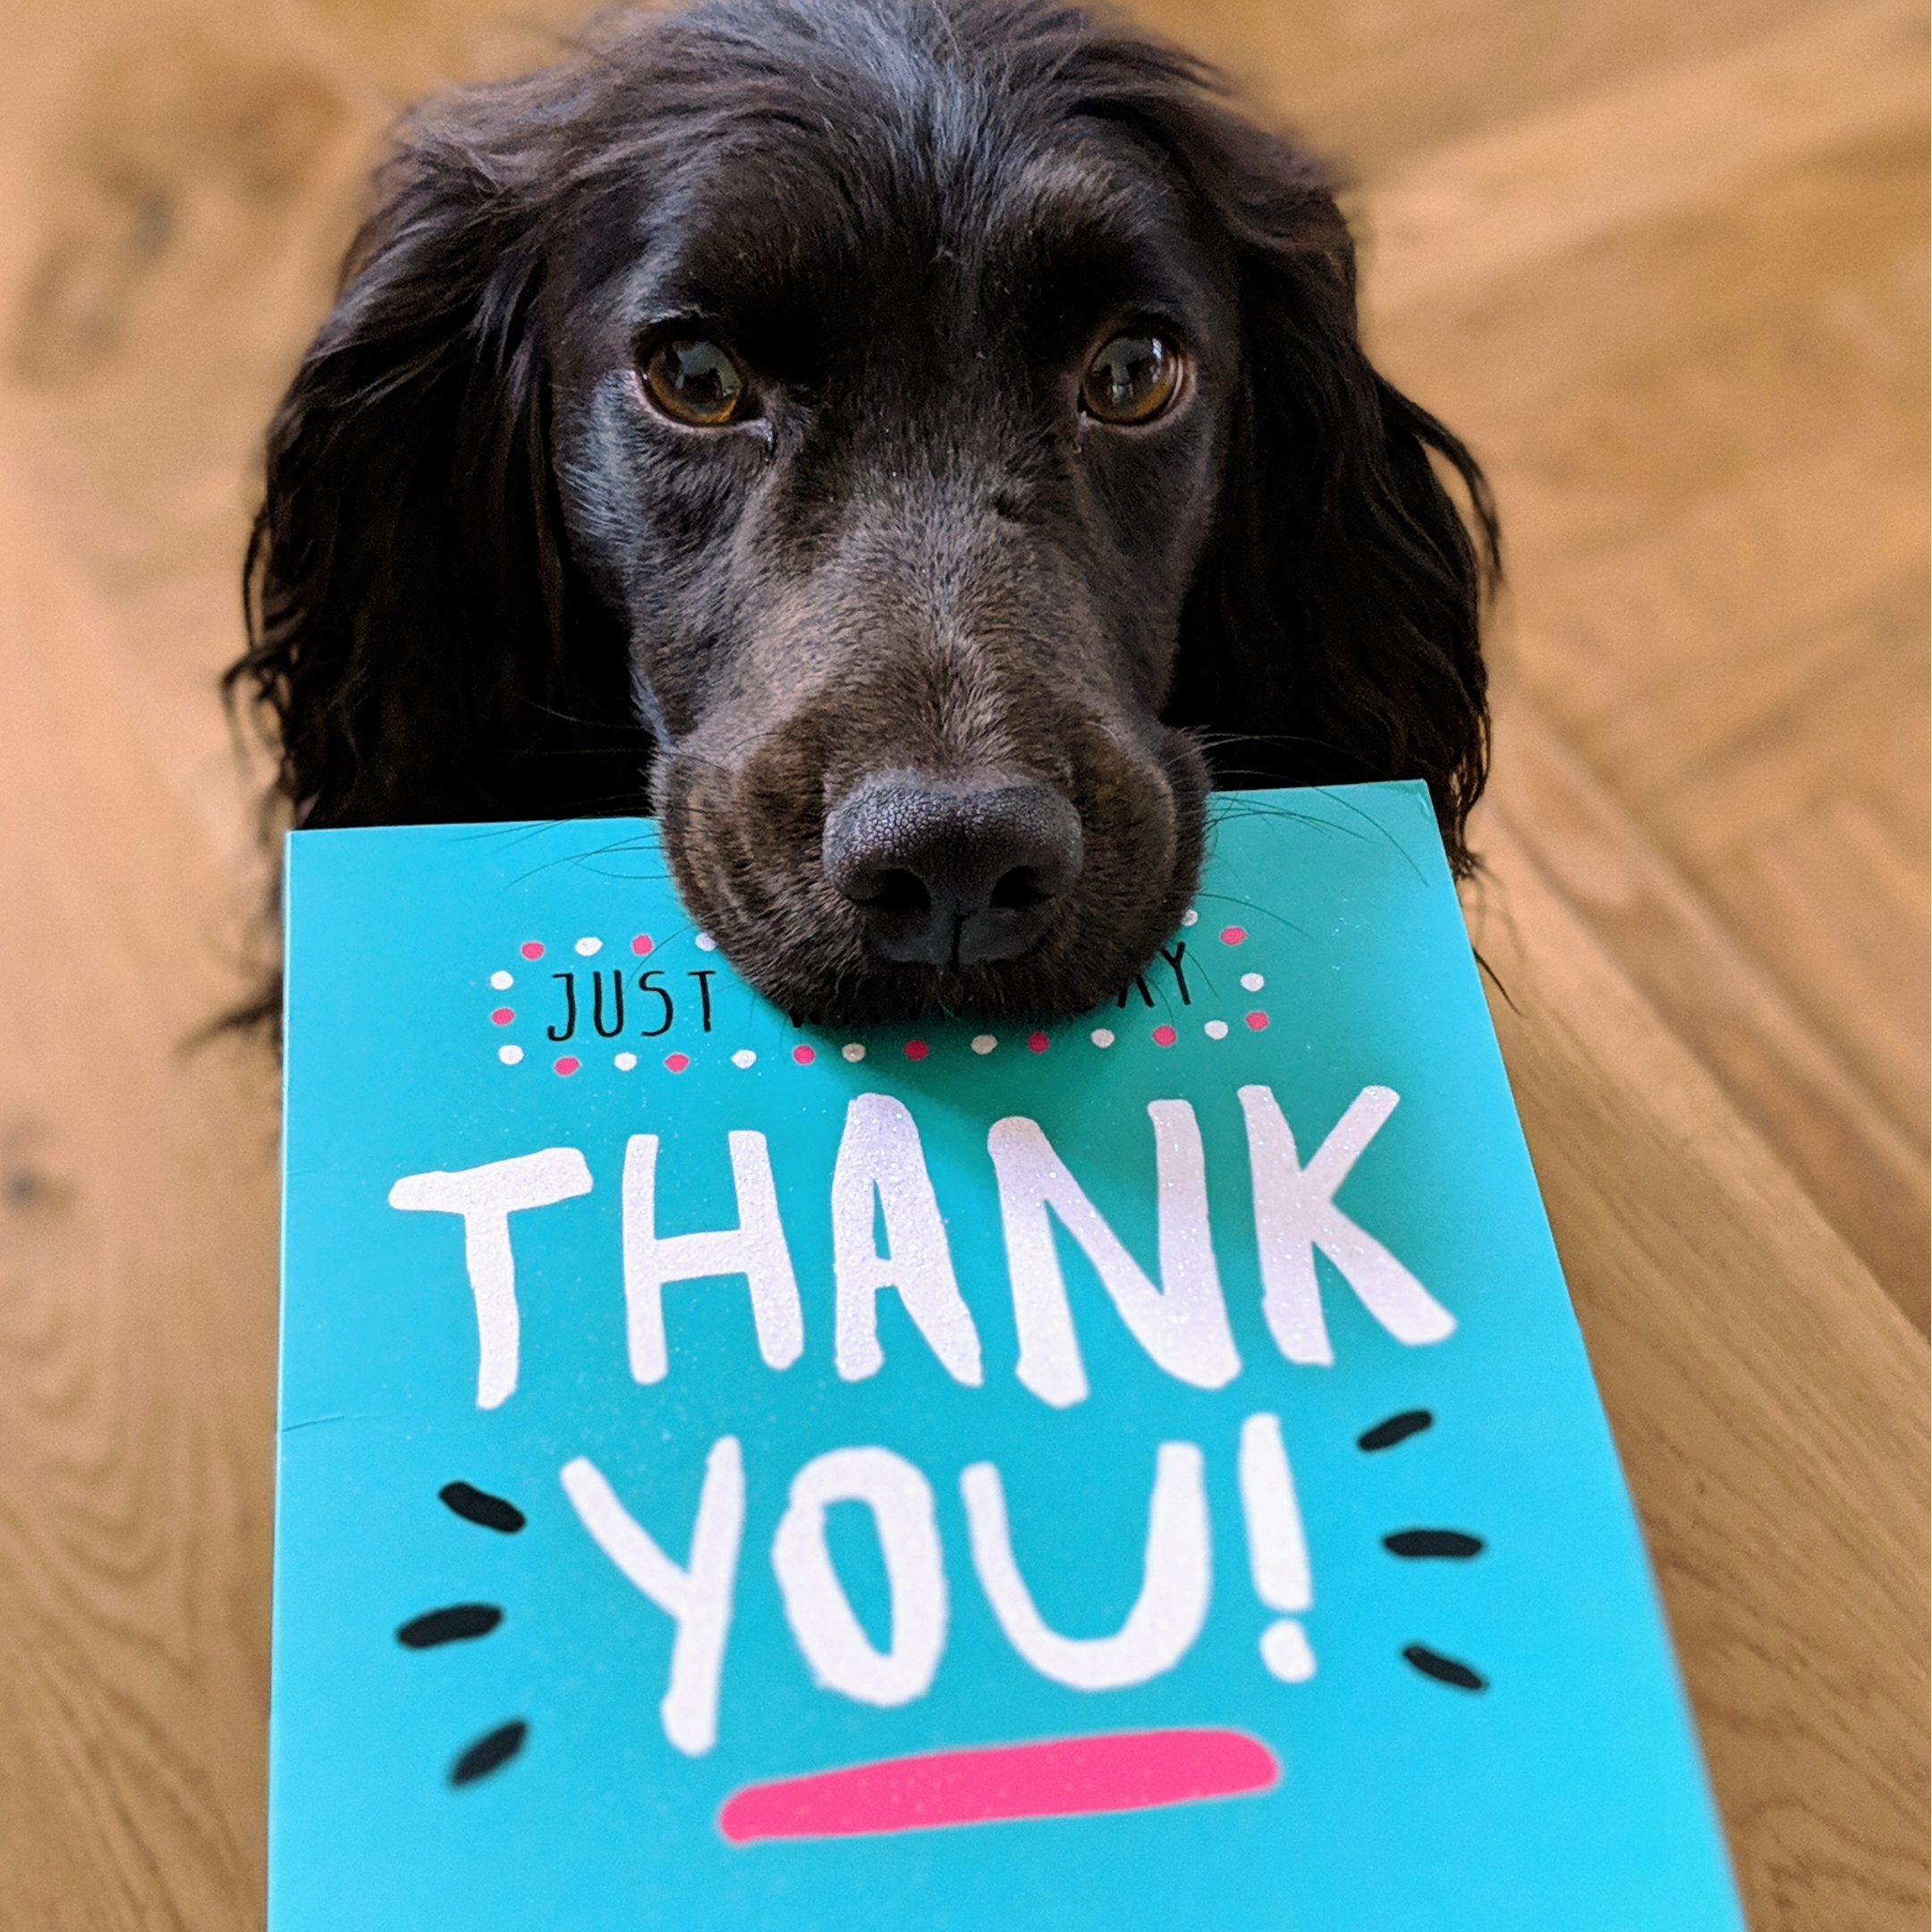 dark brown long ear dog holding thank you card for farm fetched treats